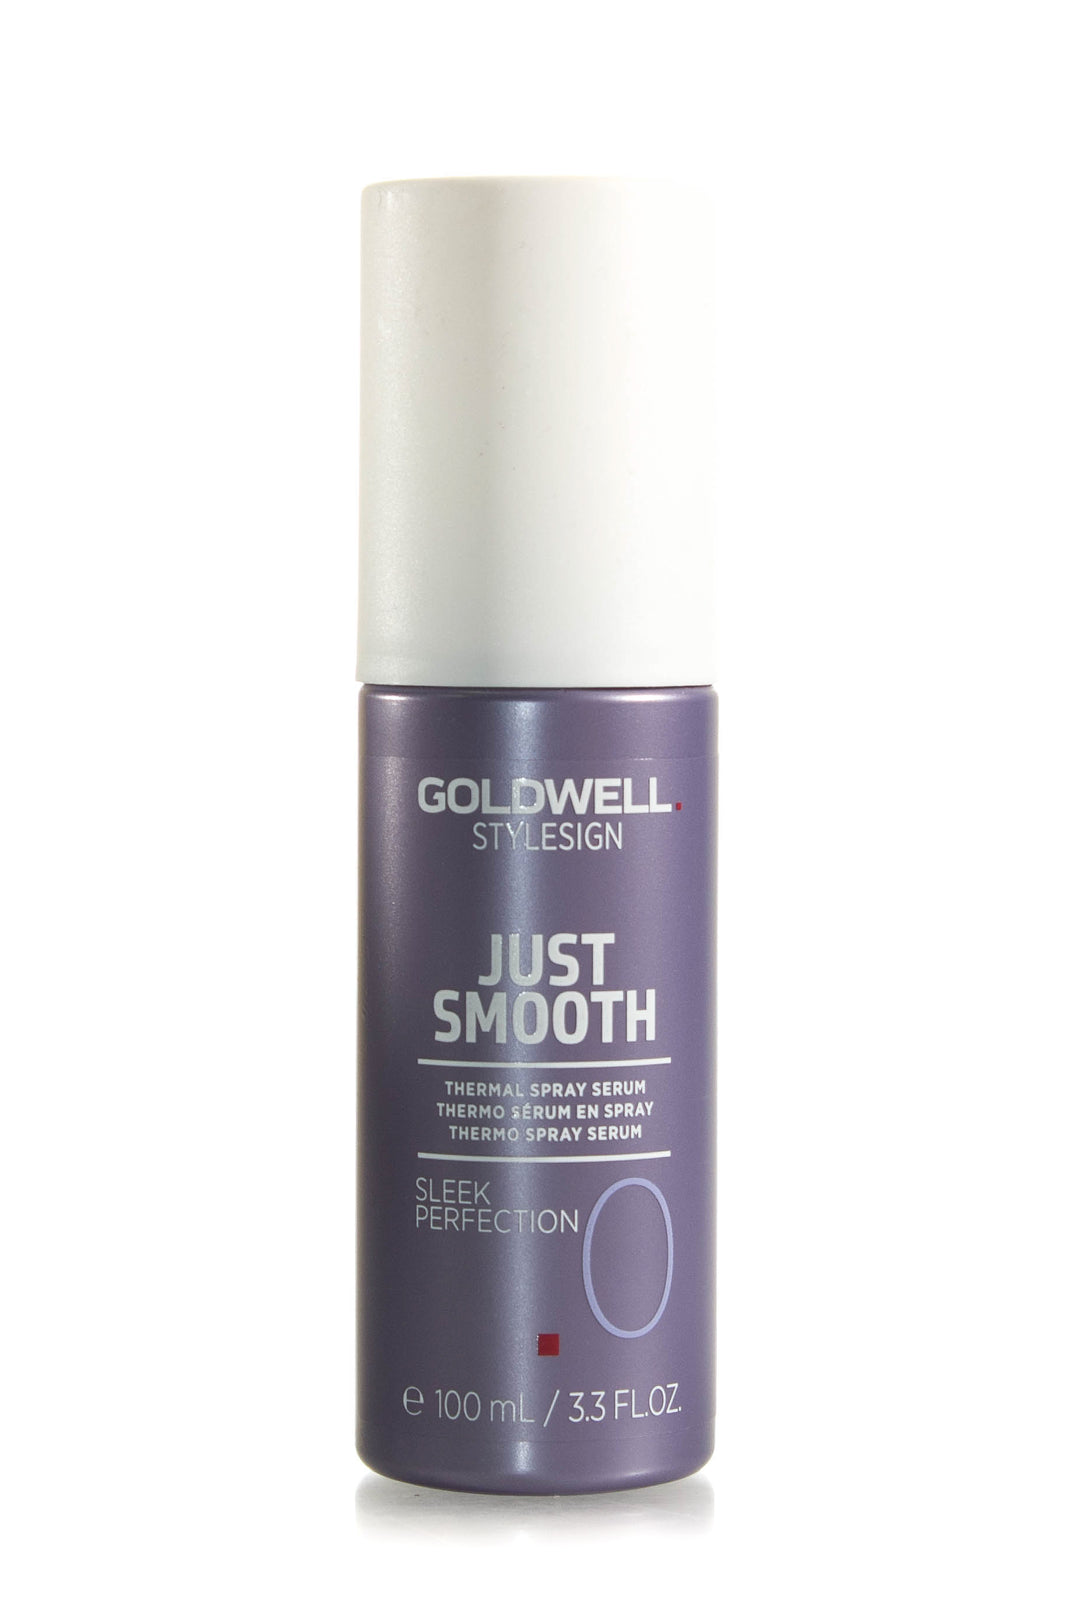 Product Image: Goldwell Just Smooth Sleek Perfection - 100ml